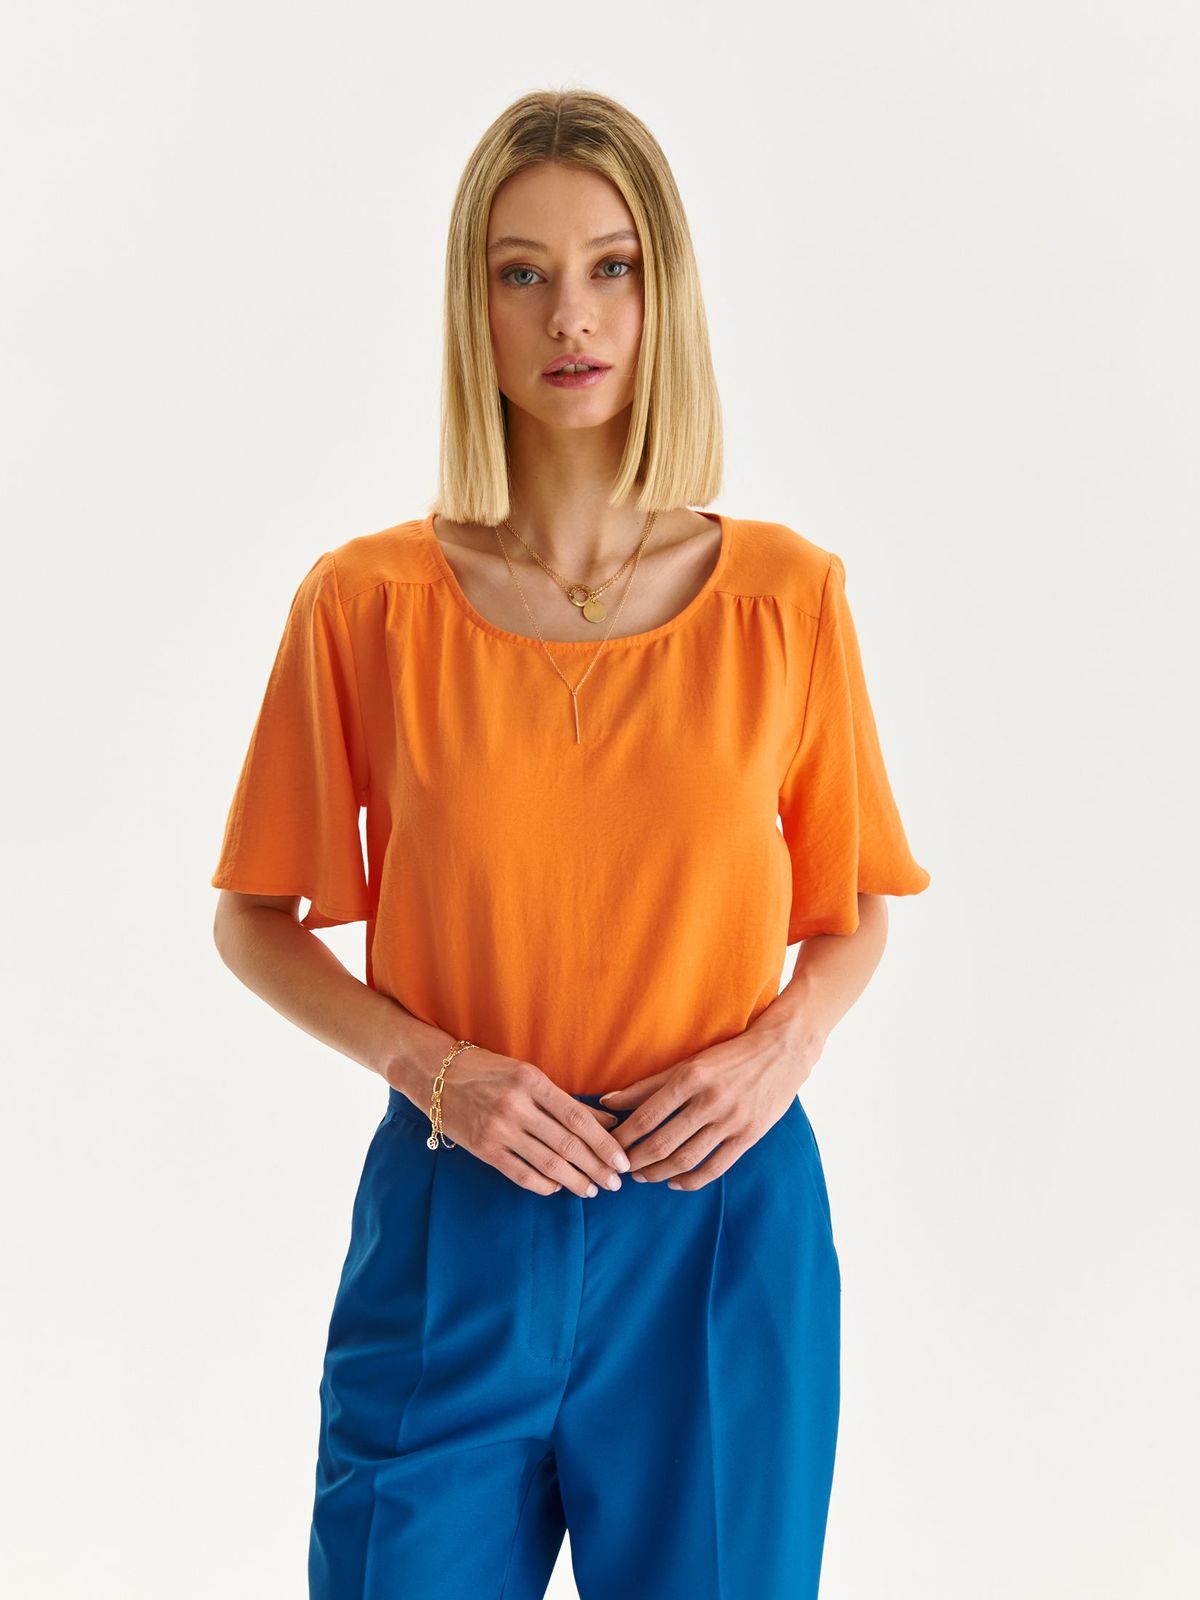 Orange women`s blouse thin fabric loose fit with rounded cleavage